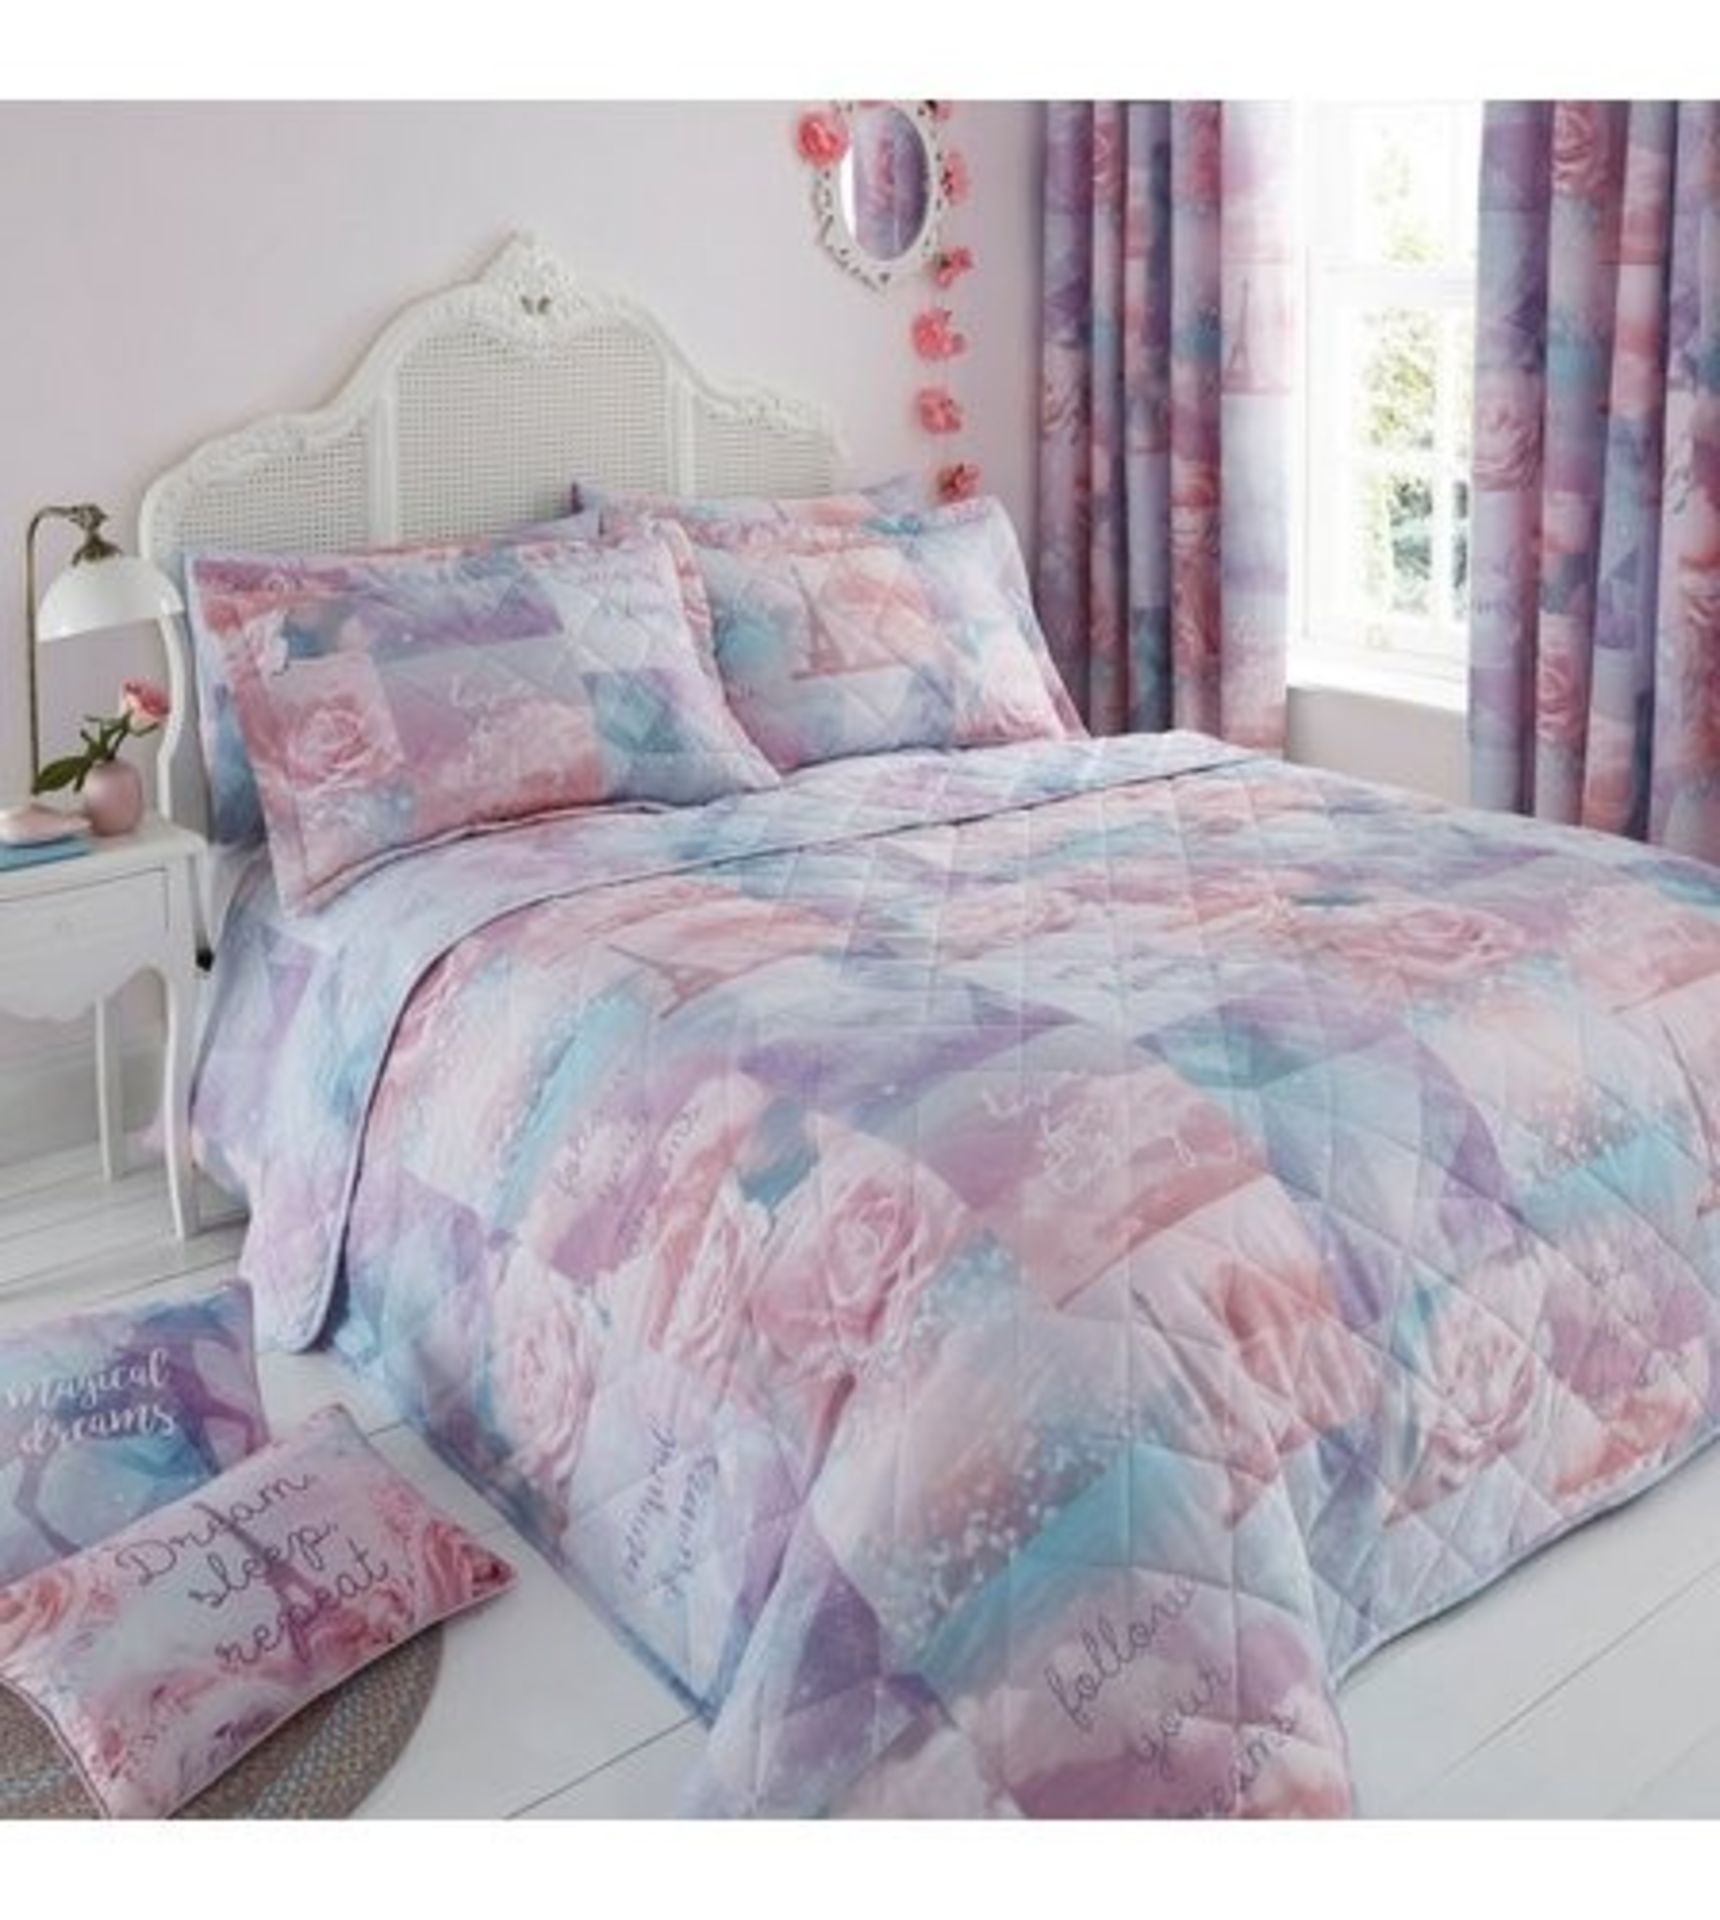 1 BAGGED PAIR OF MAGICAL DREAMS DOUBLE DUVET SET IN PINK (VIEWING HIGHLY RECOMMENDED)